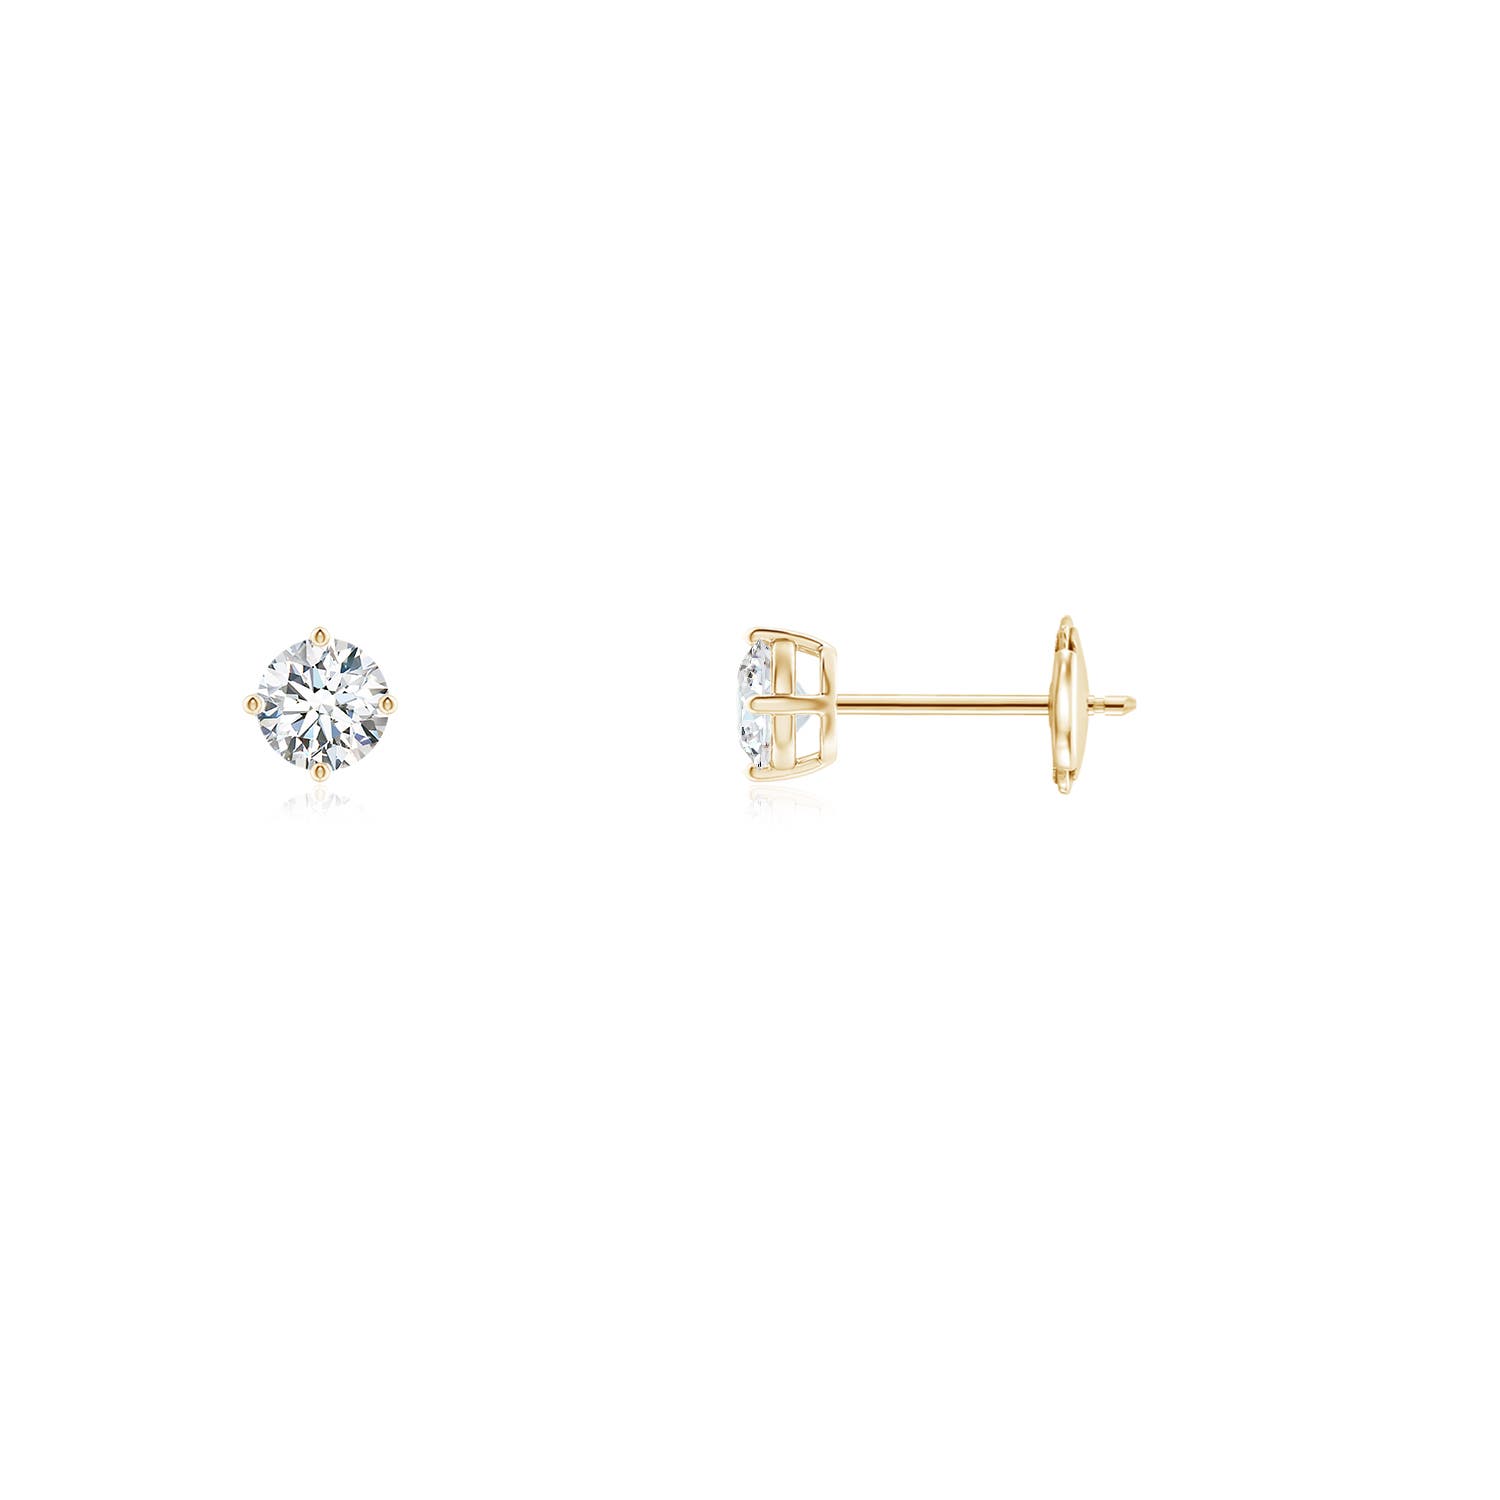 GVS2 / 0.21 CT / 14 KT Yellow Gold